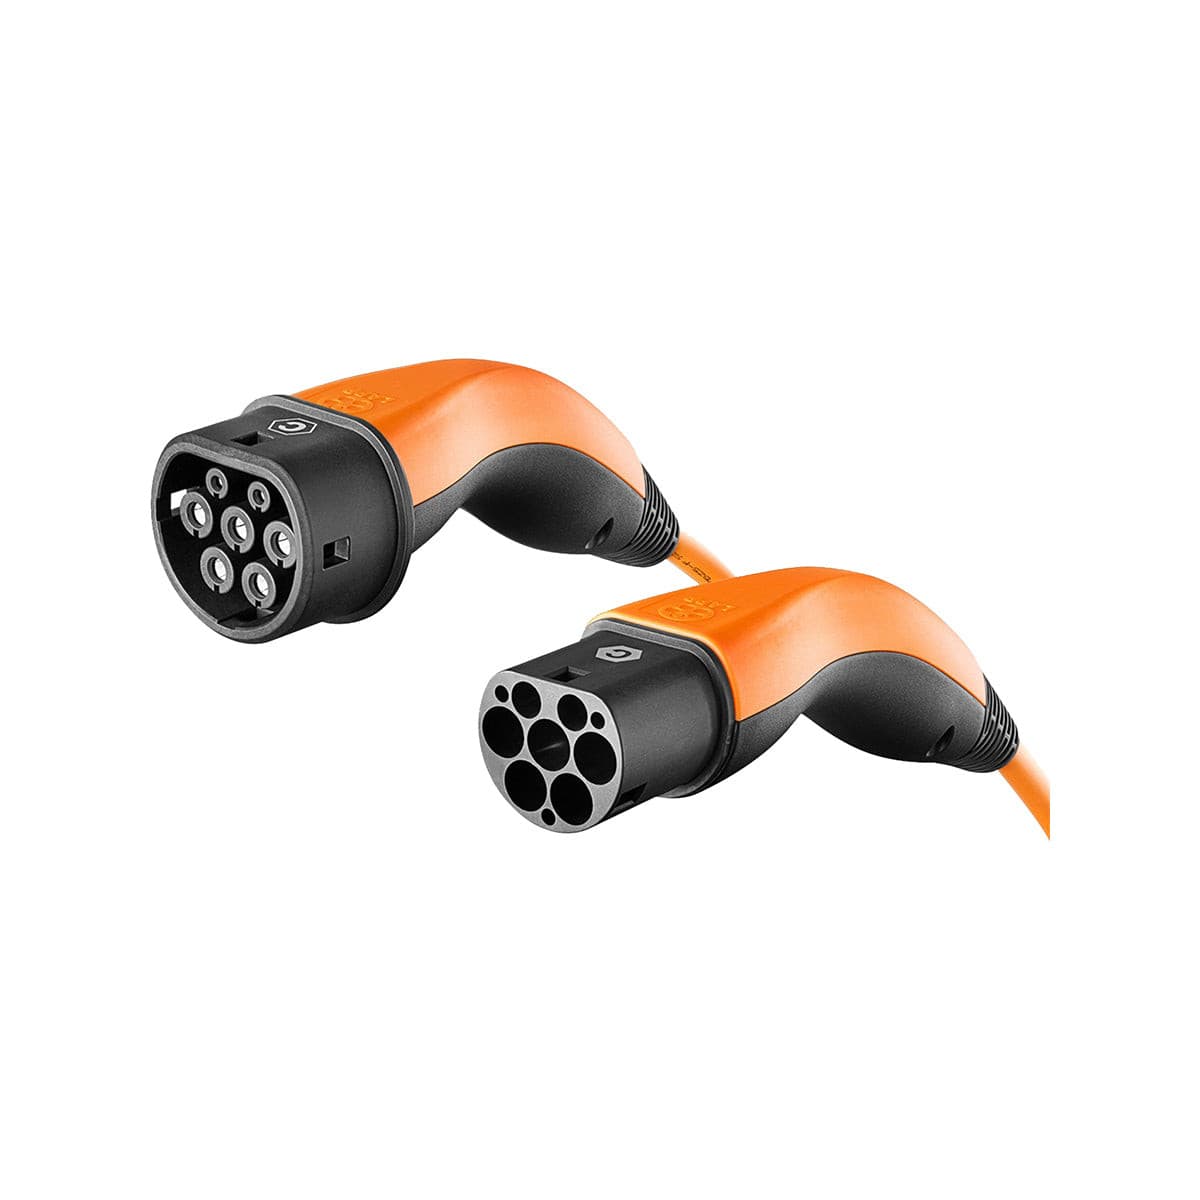 LAPP EV Helix Charge Cable Type 2 (11kW-3P-20A) 5m for Hybrid and Electric Cars - Orange.